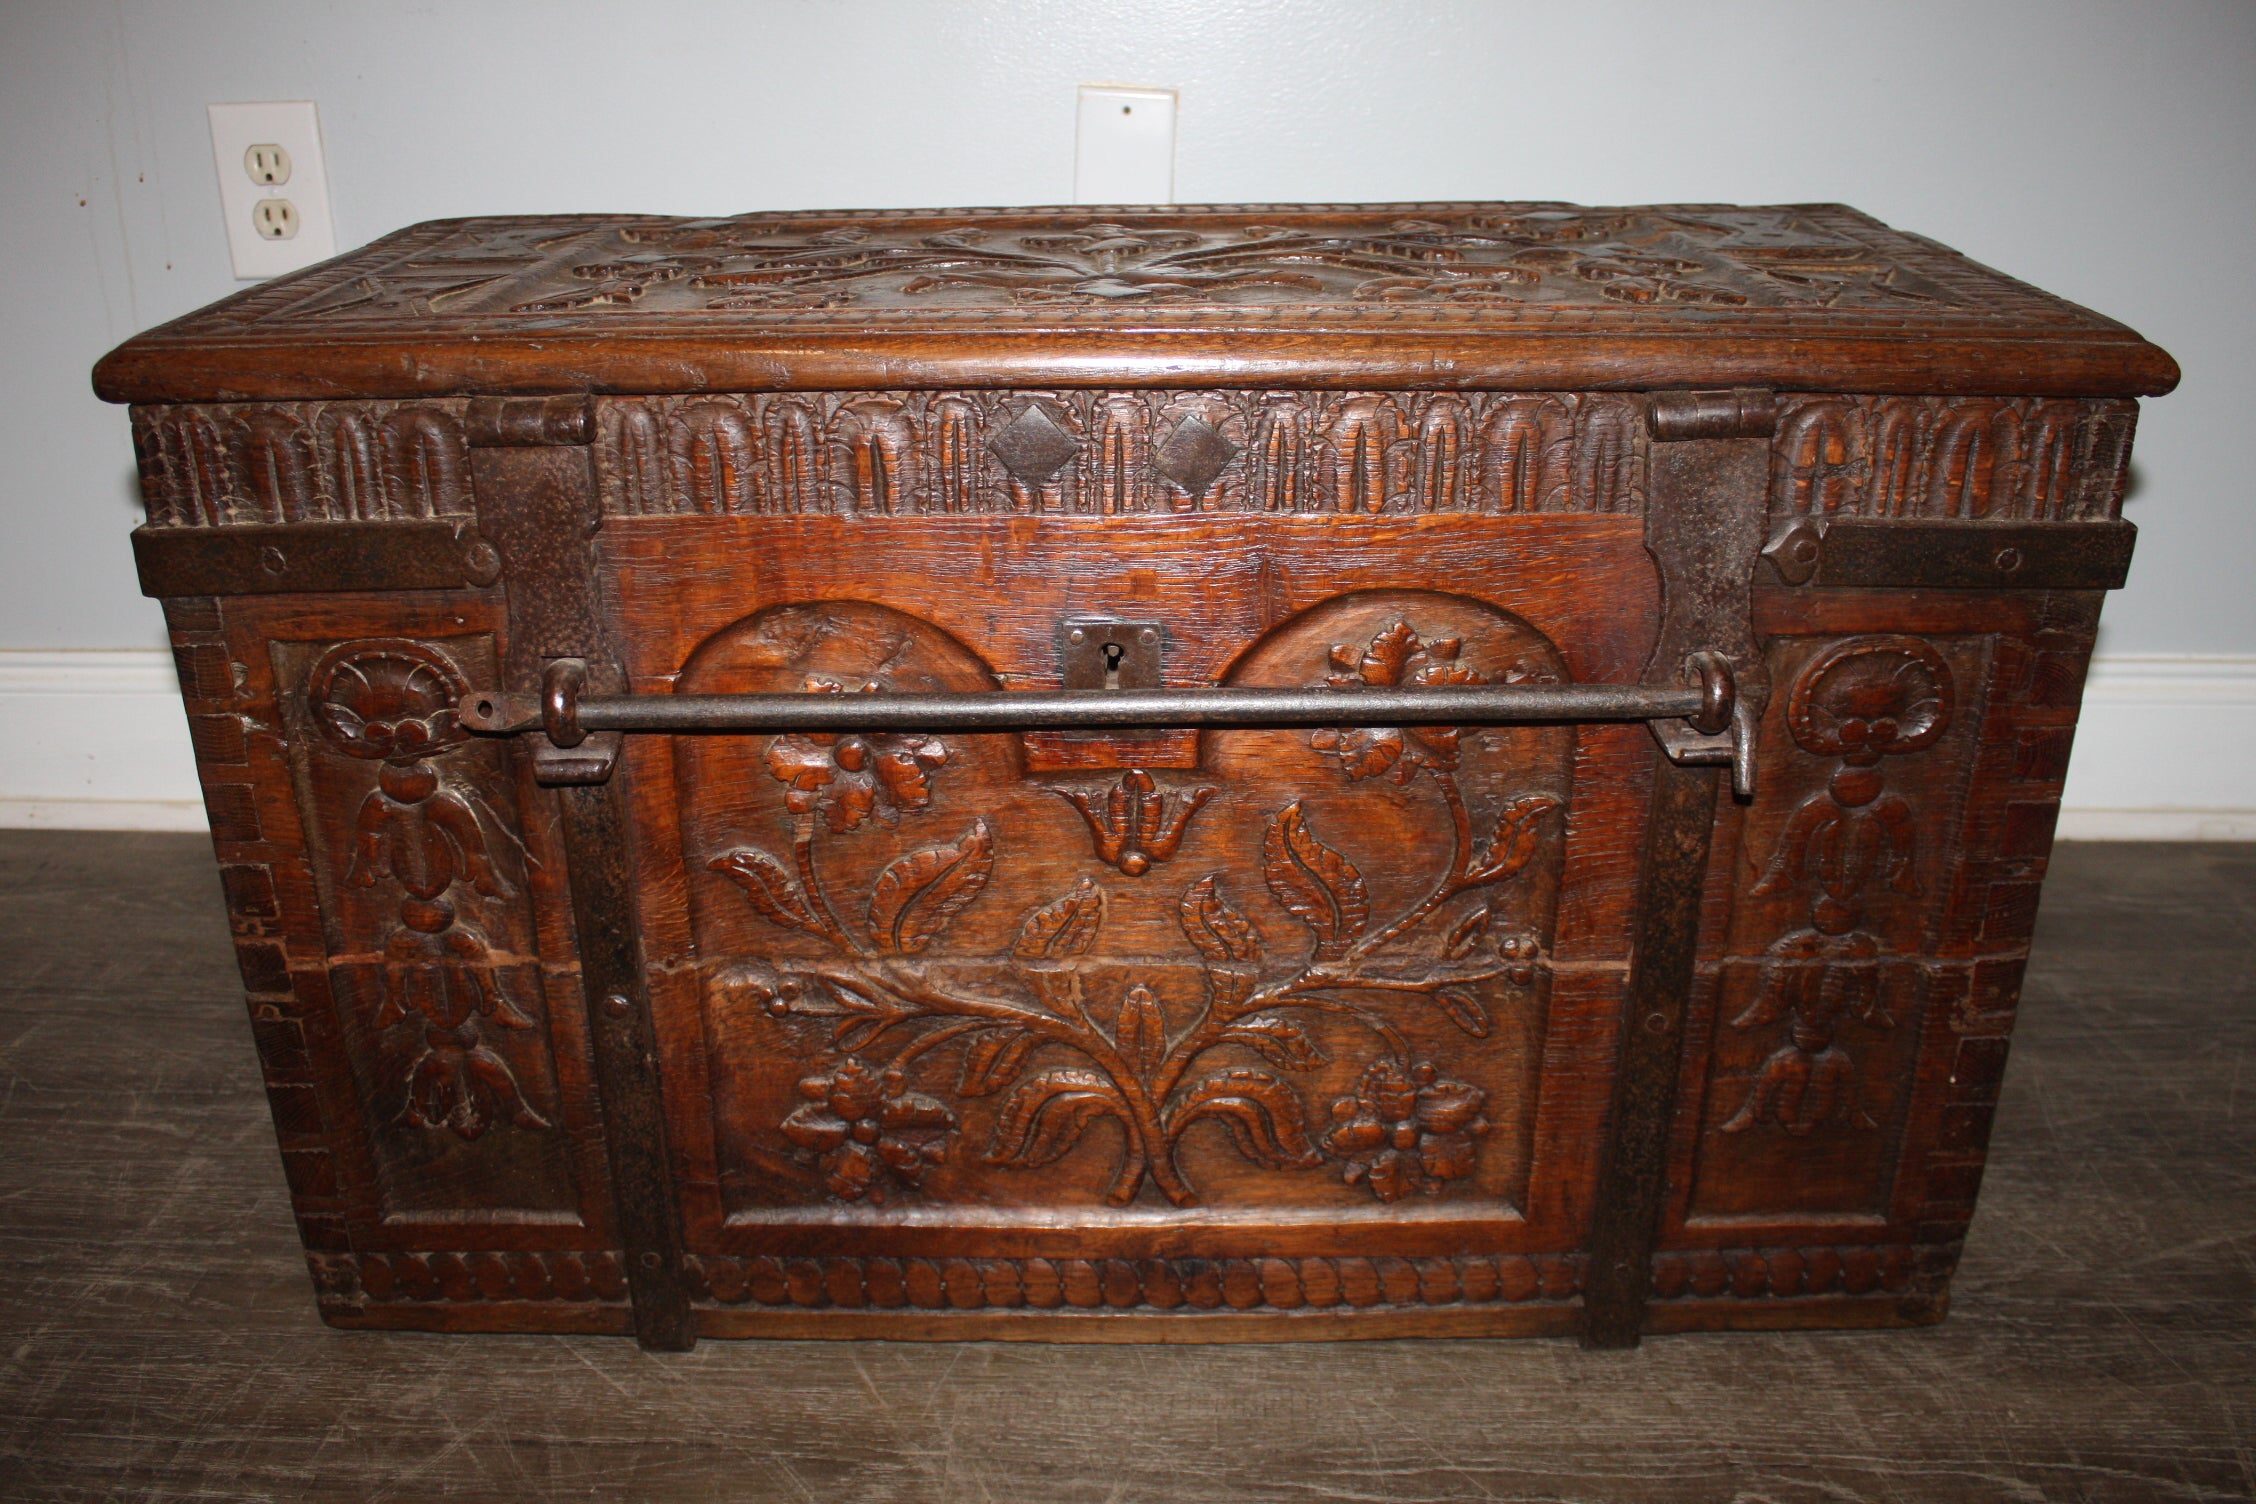 This magnificent trunk is rich on carvings and Iron, it has as well its original iron bar to lock it. Just beautiful